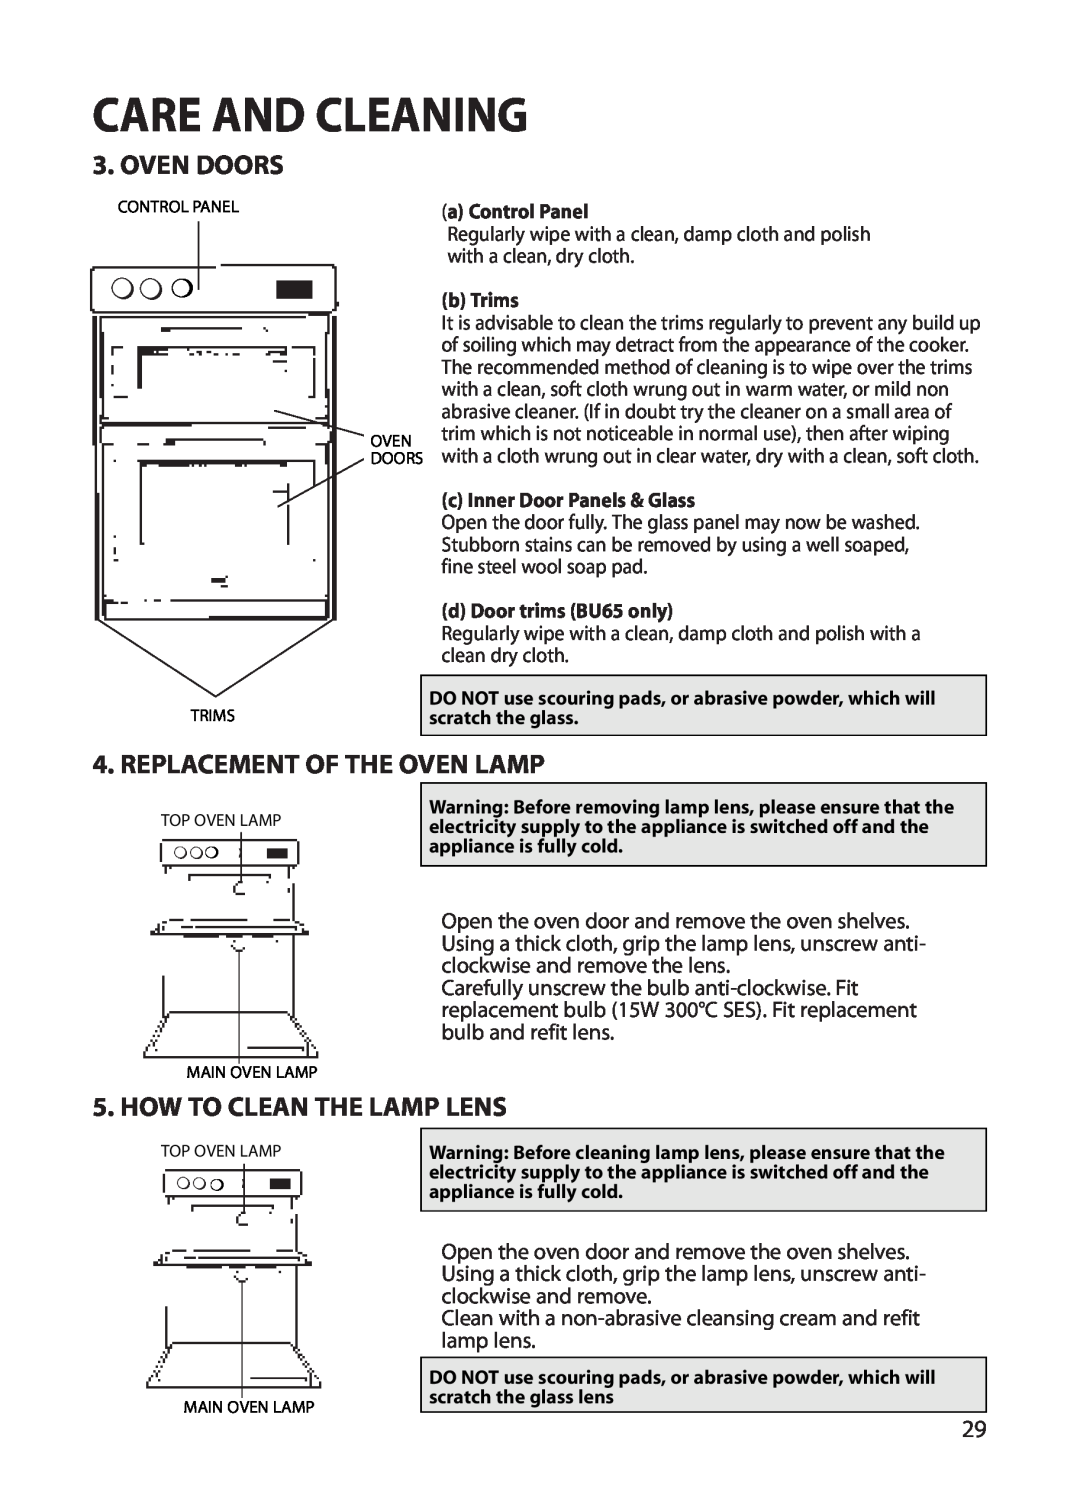 Hotpoint BU62 BU65 manual Care And Cleaning, Oven Doors, Replacement Of The Oven Lamp, How To Clean The Lamp Lens 